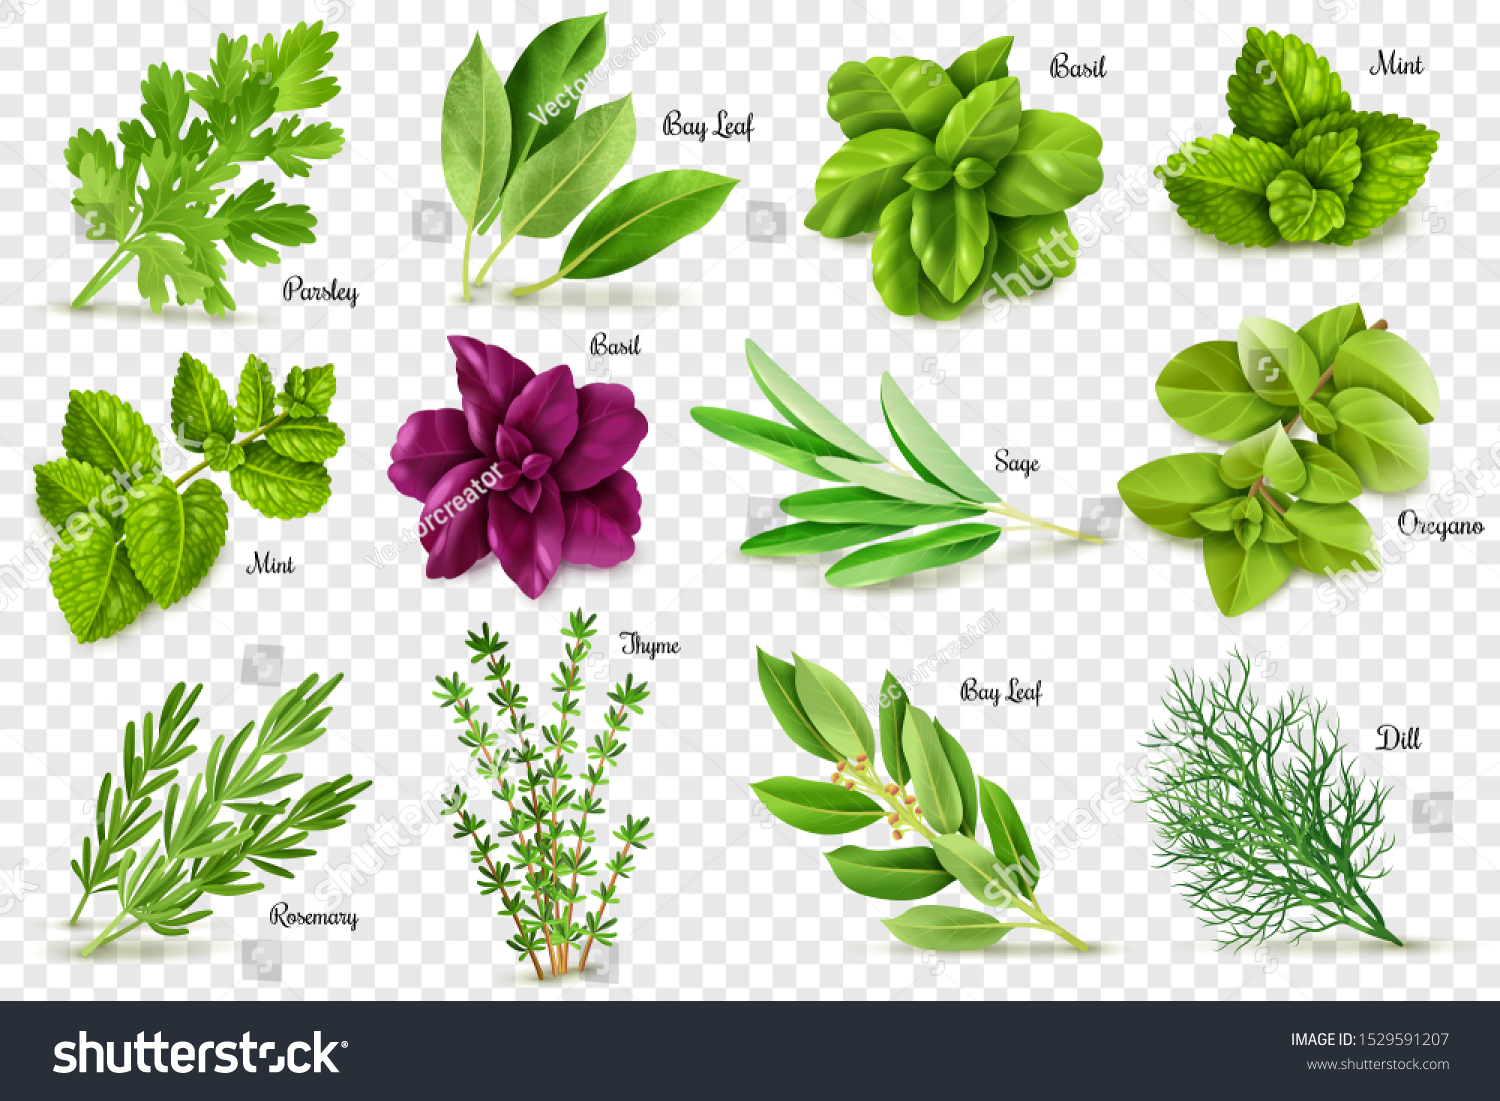 A large set of herbs on a transparent background, isolated objects, popular culinary plants, natural health care, mint and rosemary, basil, thyme, parsley, dill, bay leaf, oregano and sage